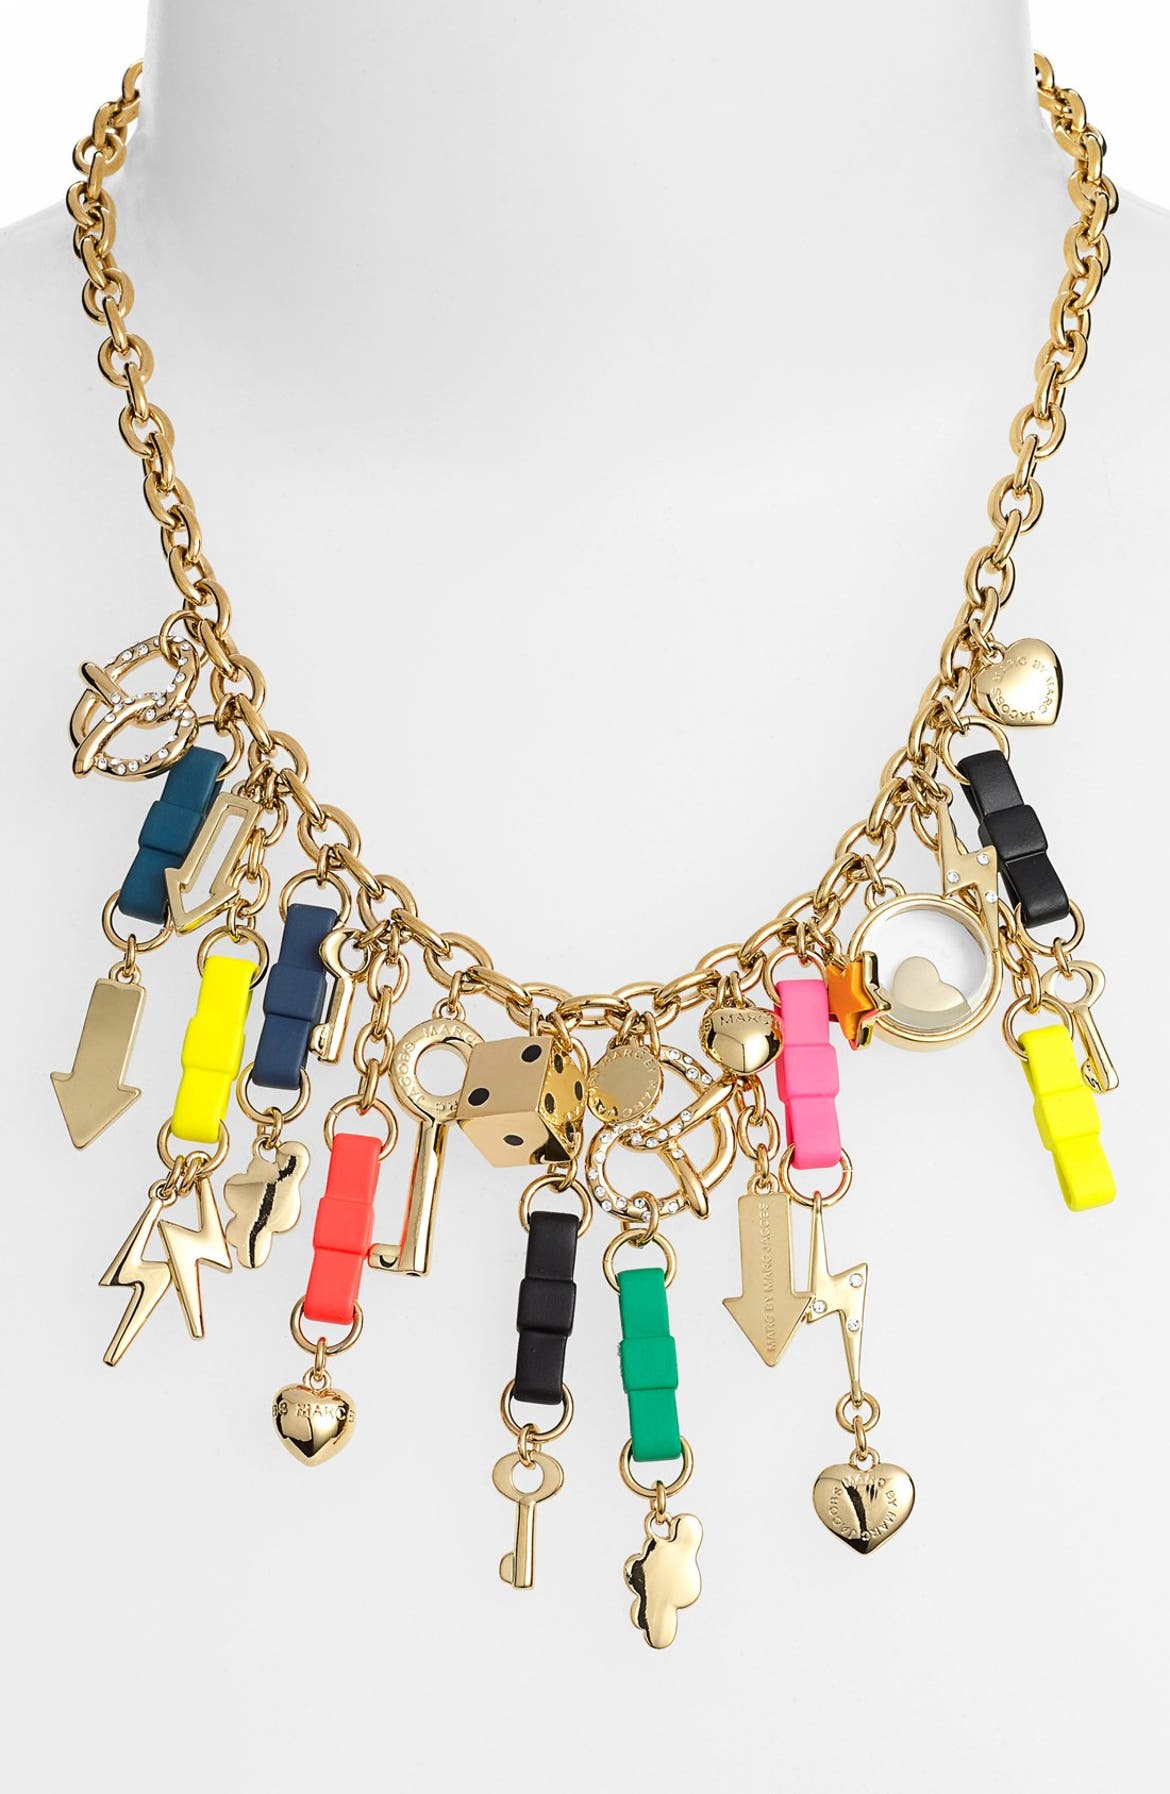 MARC BY MARC JACOBS 'Bow Tie' Frontal Necklace | Nordstrom